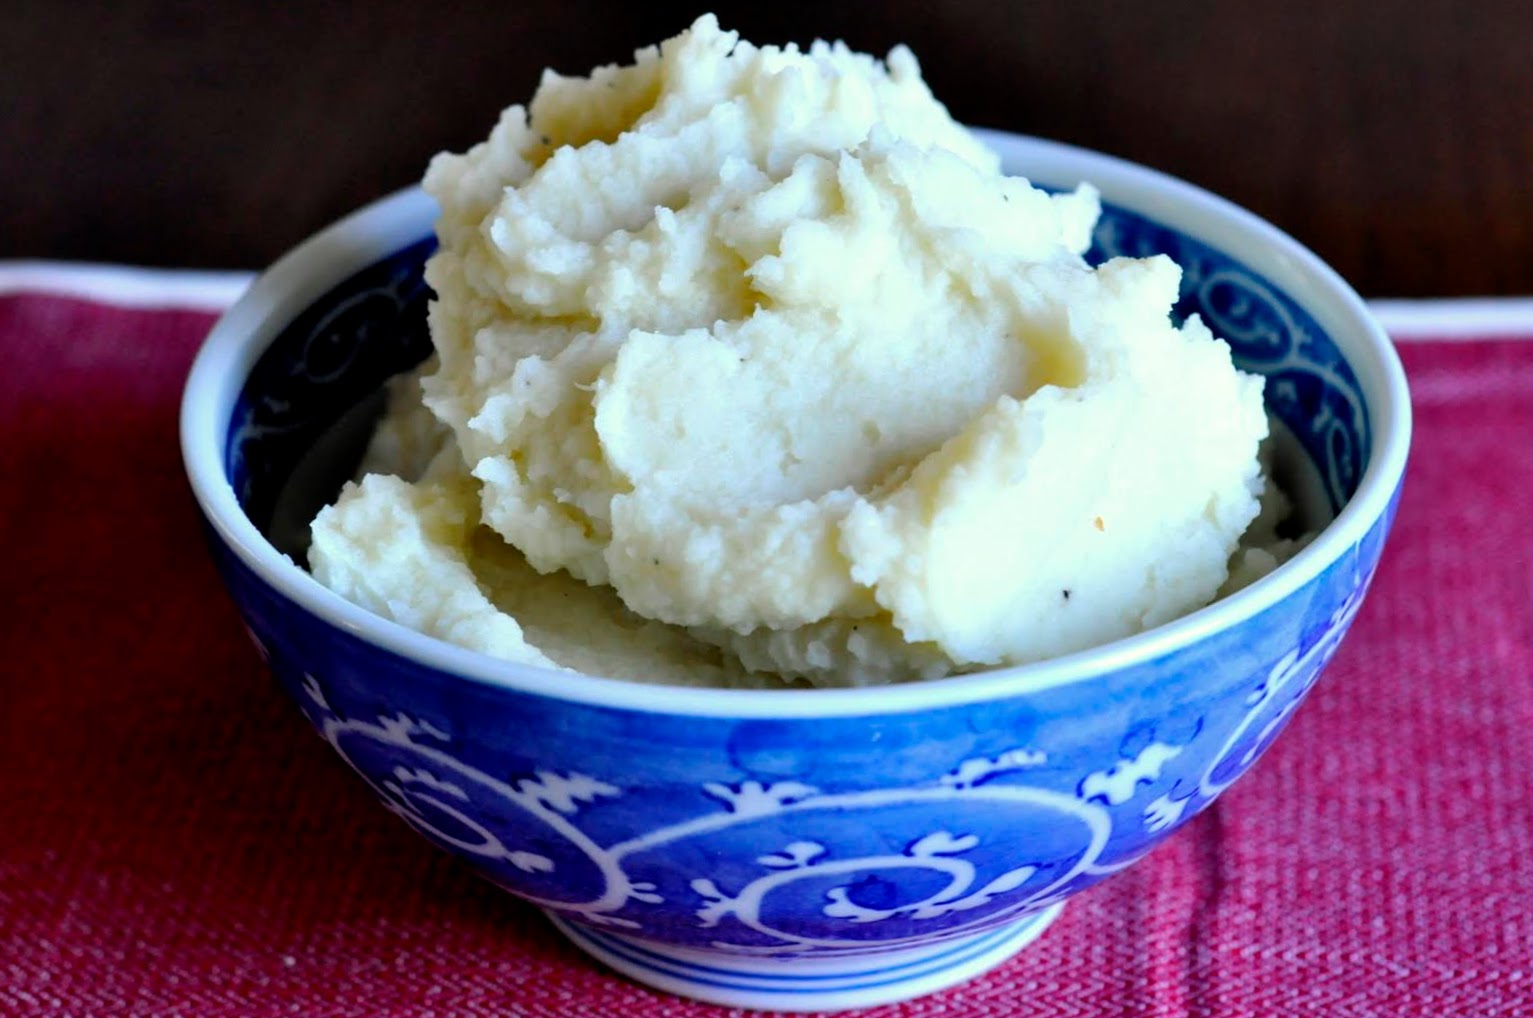 Holiday-Worthy Mashed Potatoes from Taste As You Go